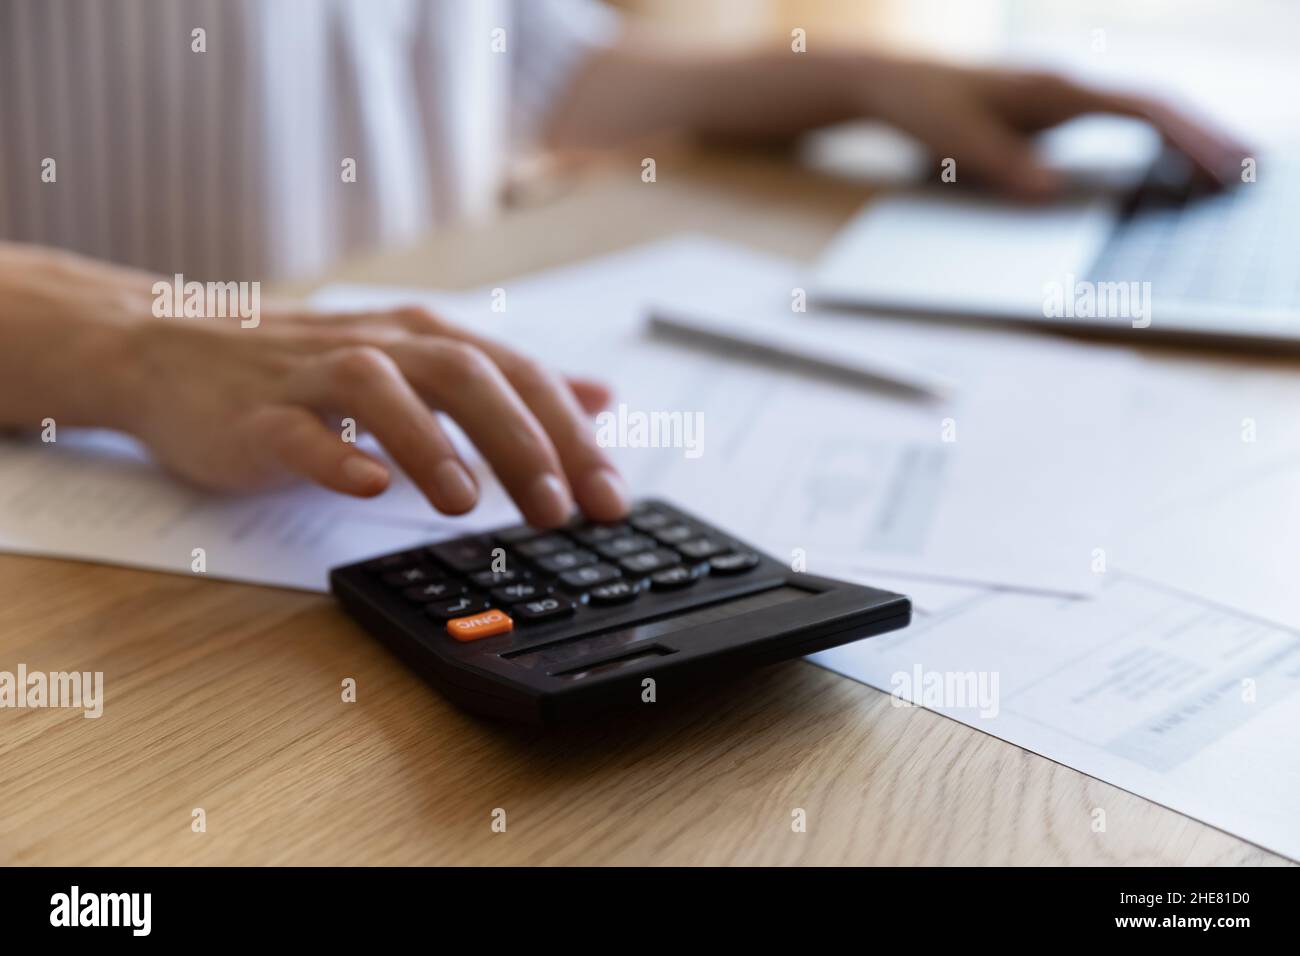 Hand of African finance professional woman using calculator Stock Photo